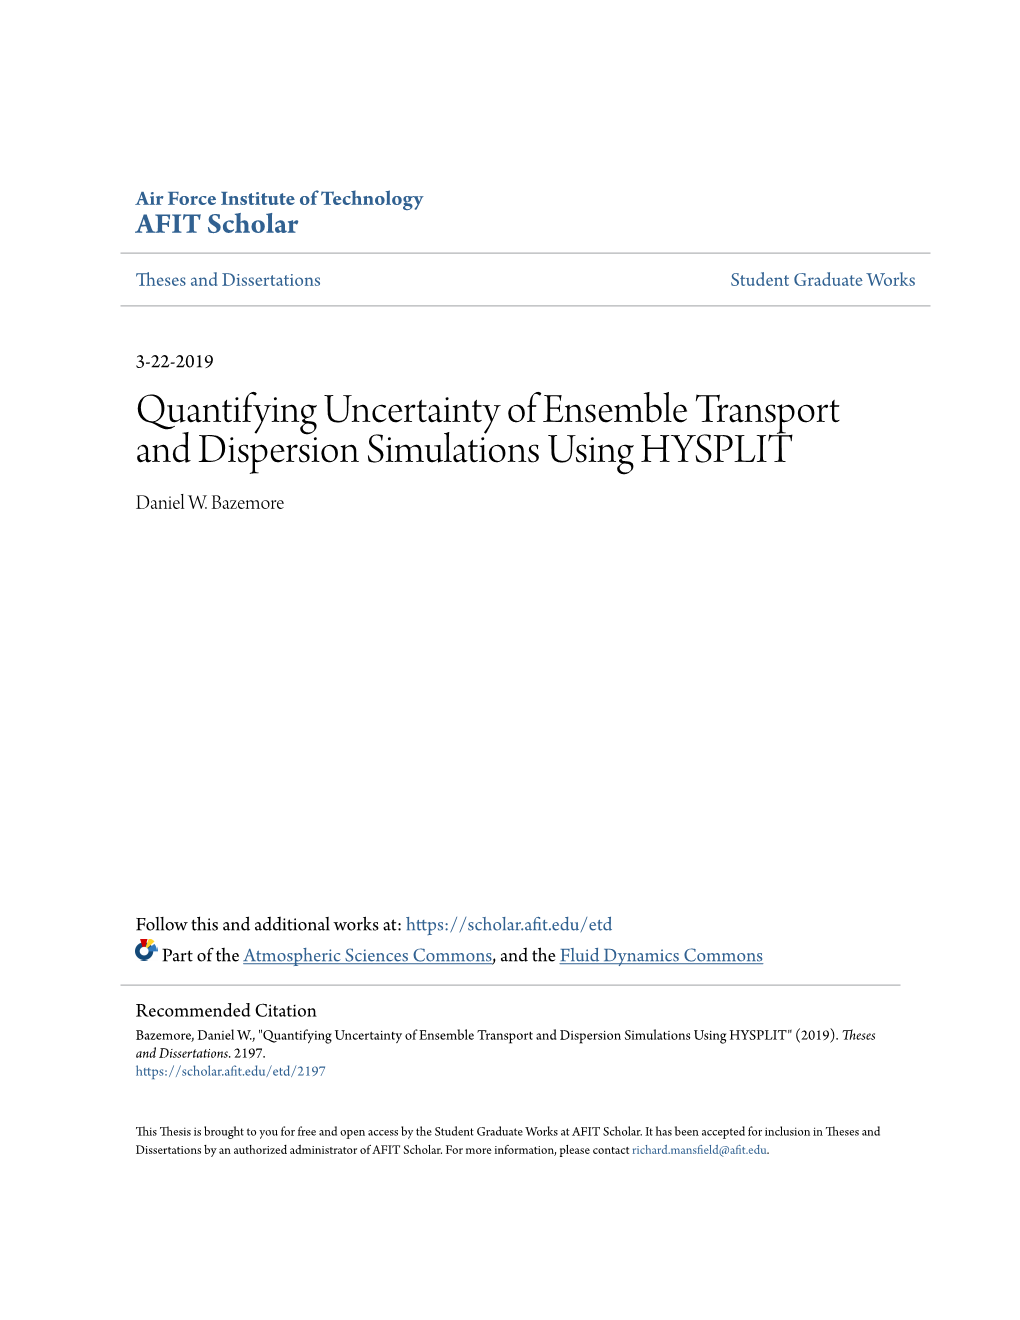 Quantifying Uncertainty of Ensemble Transport and Dispersion Simulations Using HYSPLIT Daniel W